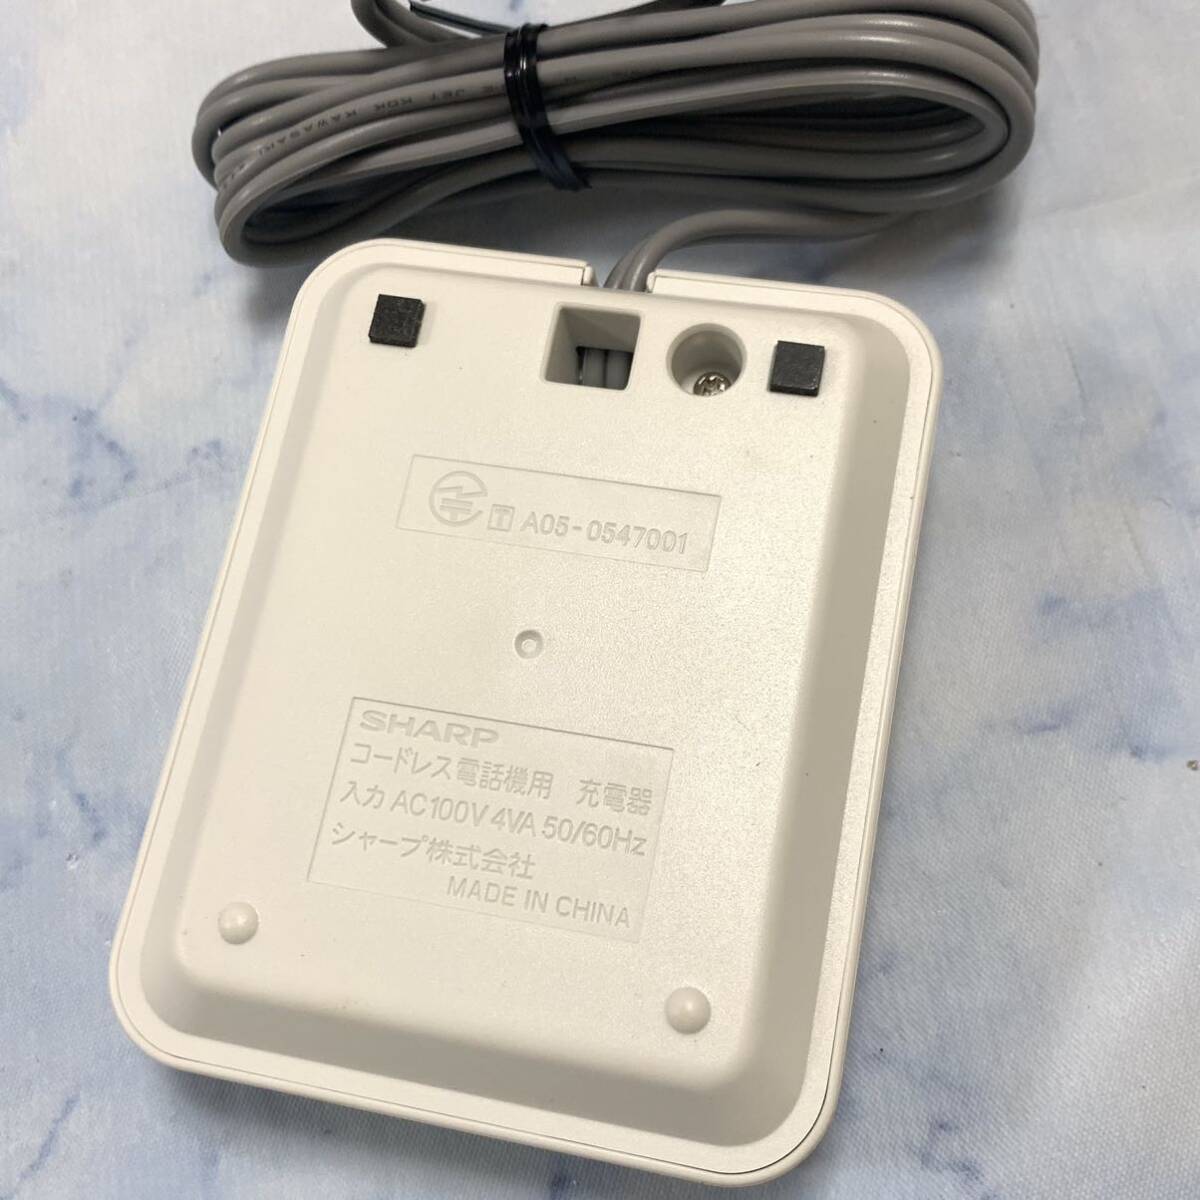 G133 unused Muji Ryohin cordless answer phone machine /FAX for cordless handset JD-KS11MR[ unused goods ] present condition delivery SHARP sharp in box manual charger 